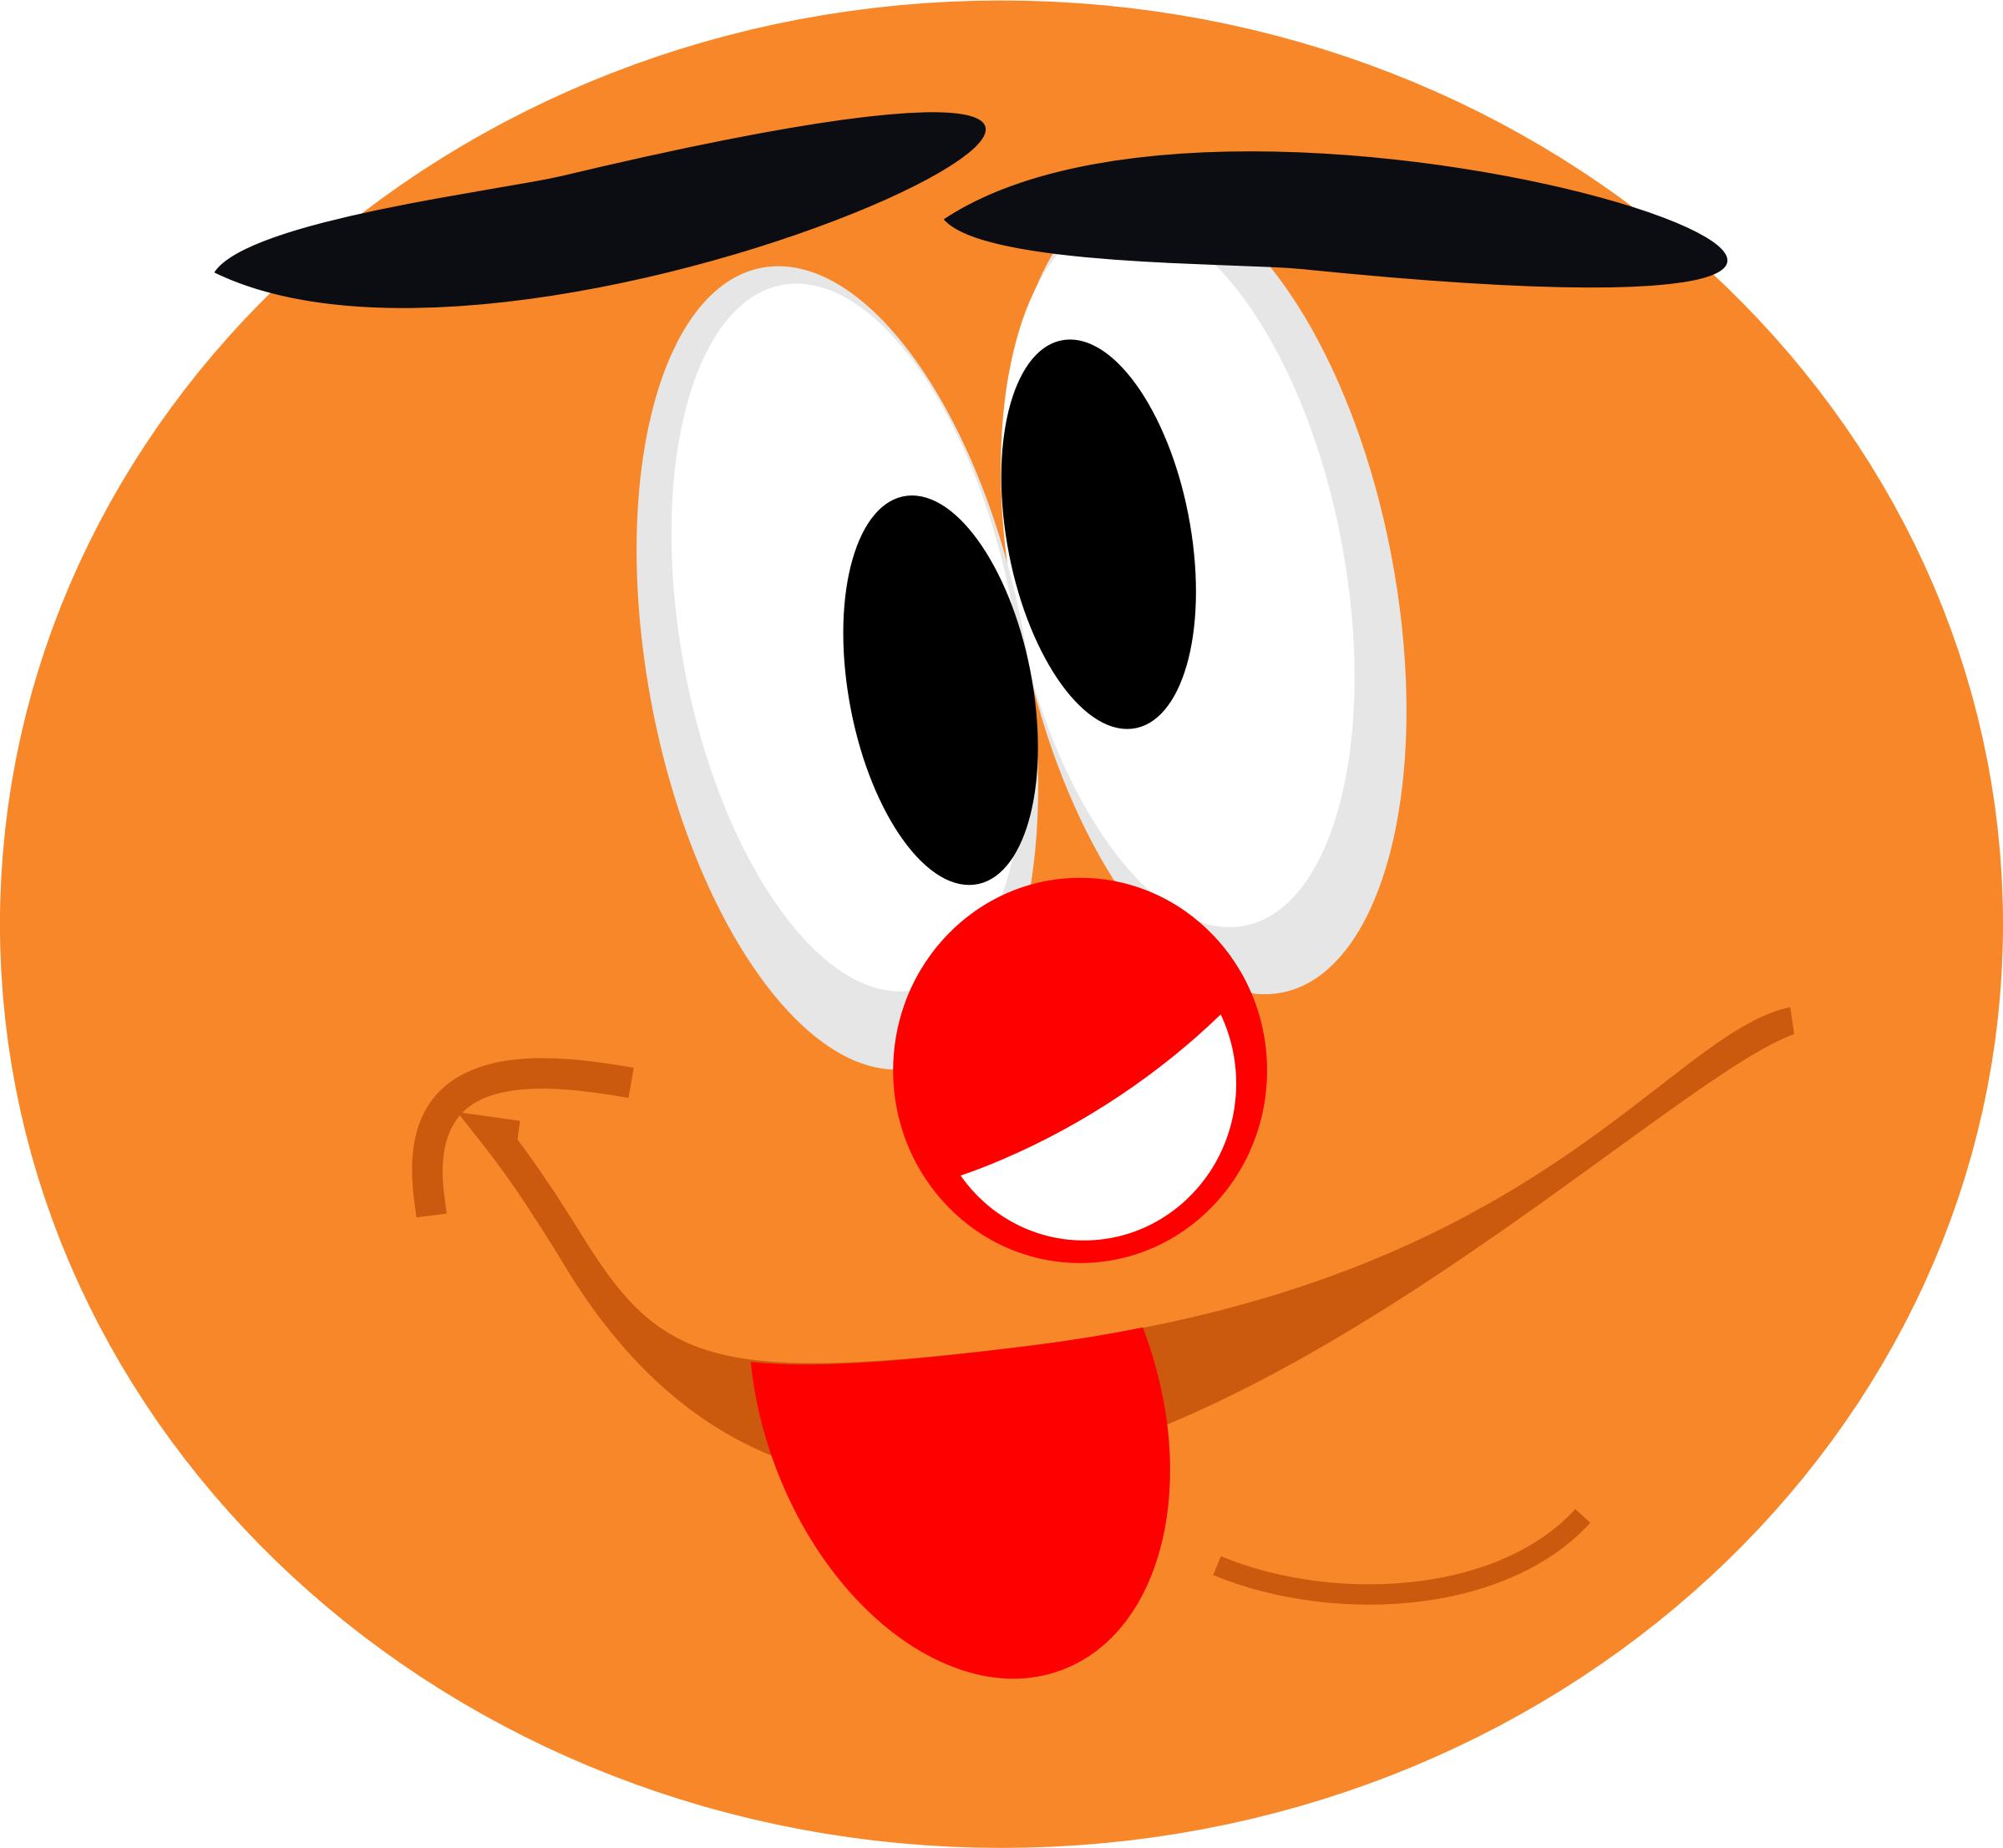 Smiley Clown 2 png